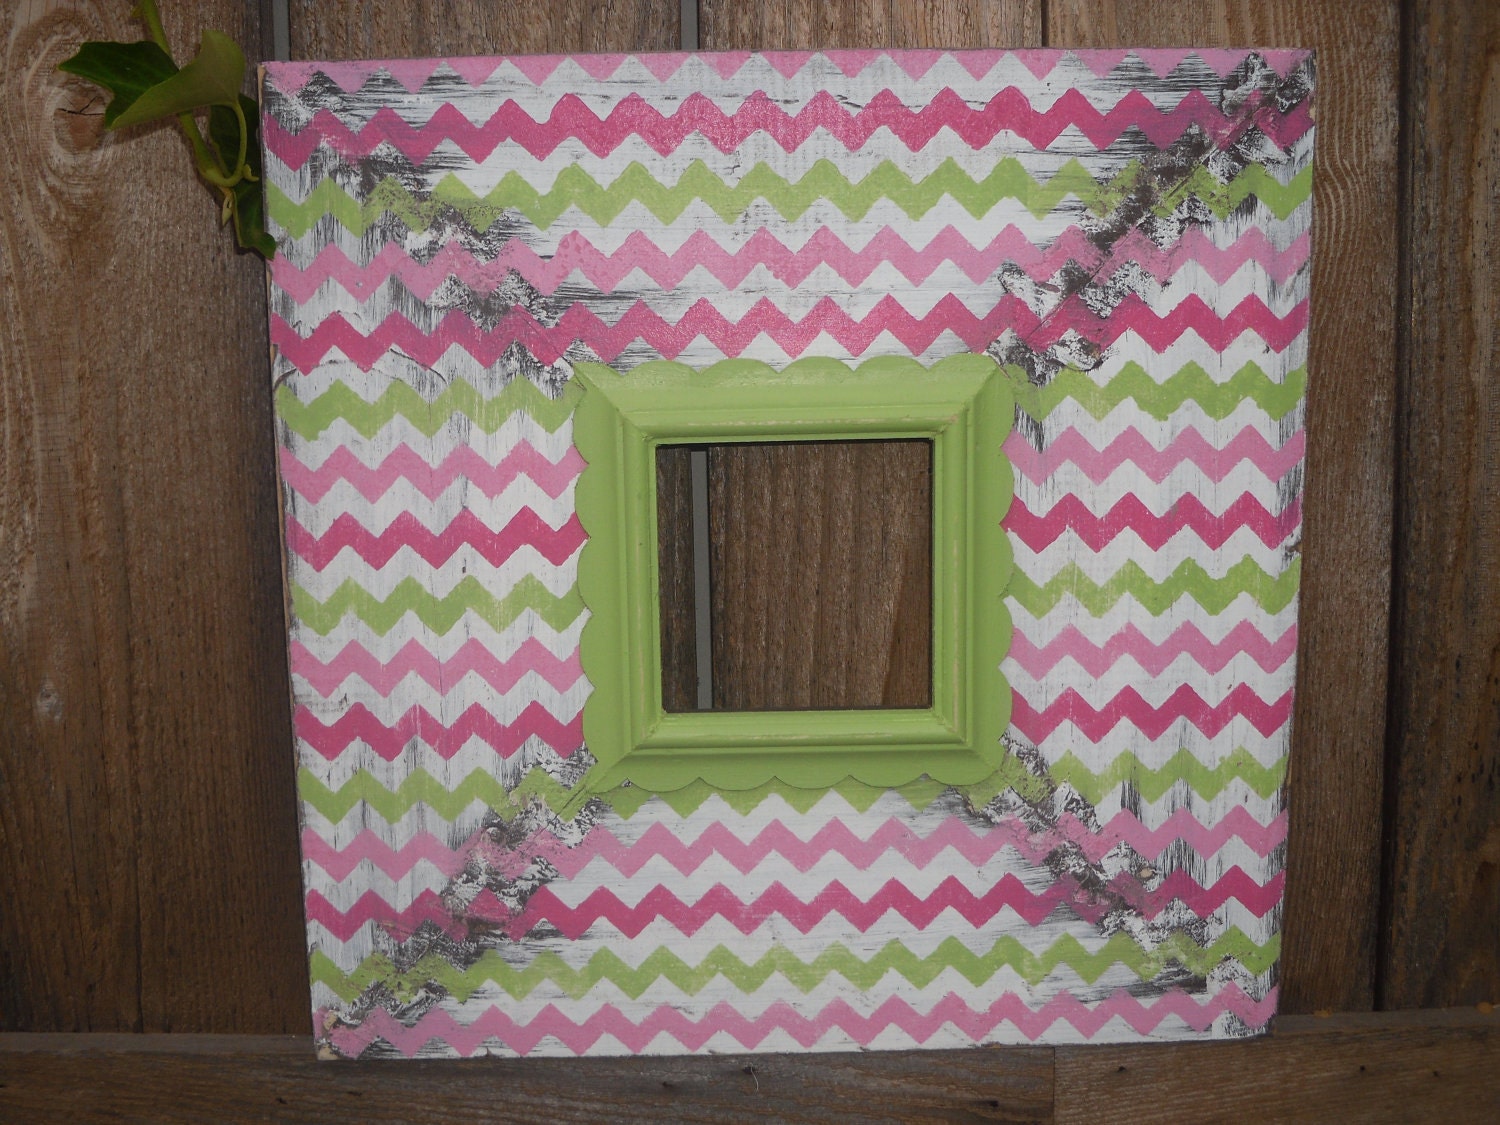 1-4x4 Handmade Wood Frame-Chevron Pattern-Comes w/ Glass and Picture Hanger